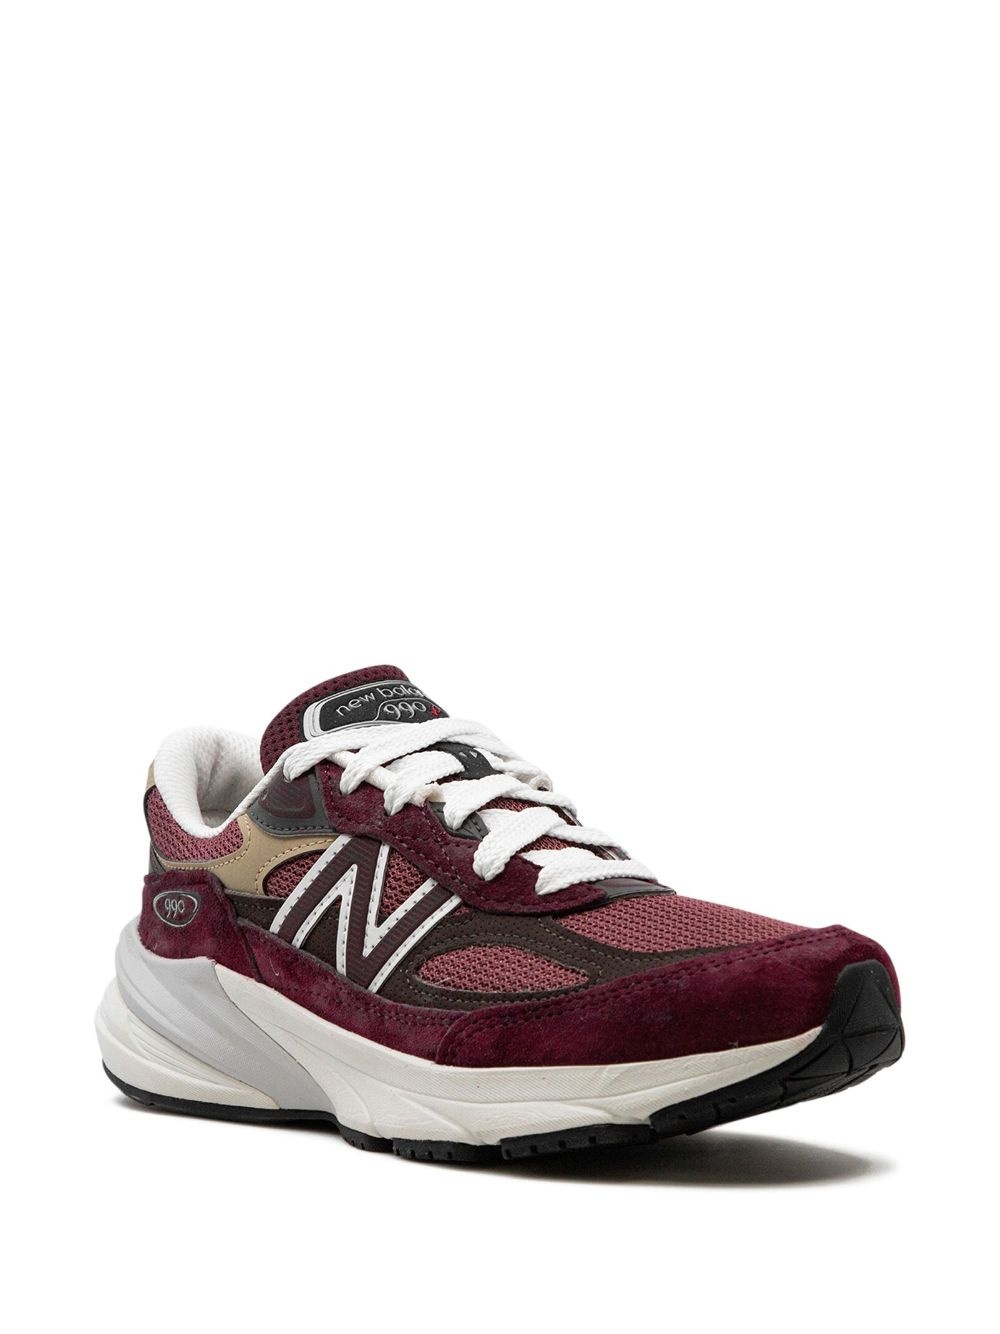 990v6 Made in USA "Burgundy" sneakers - 2